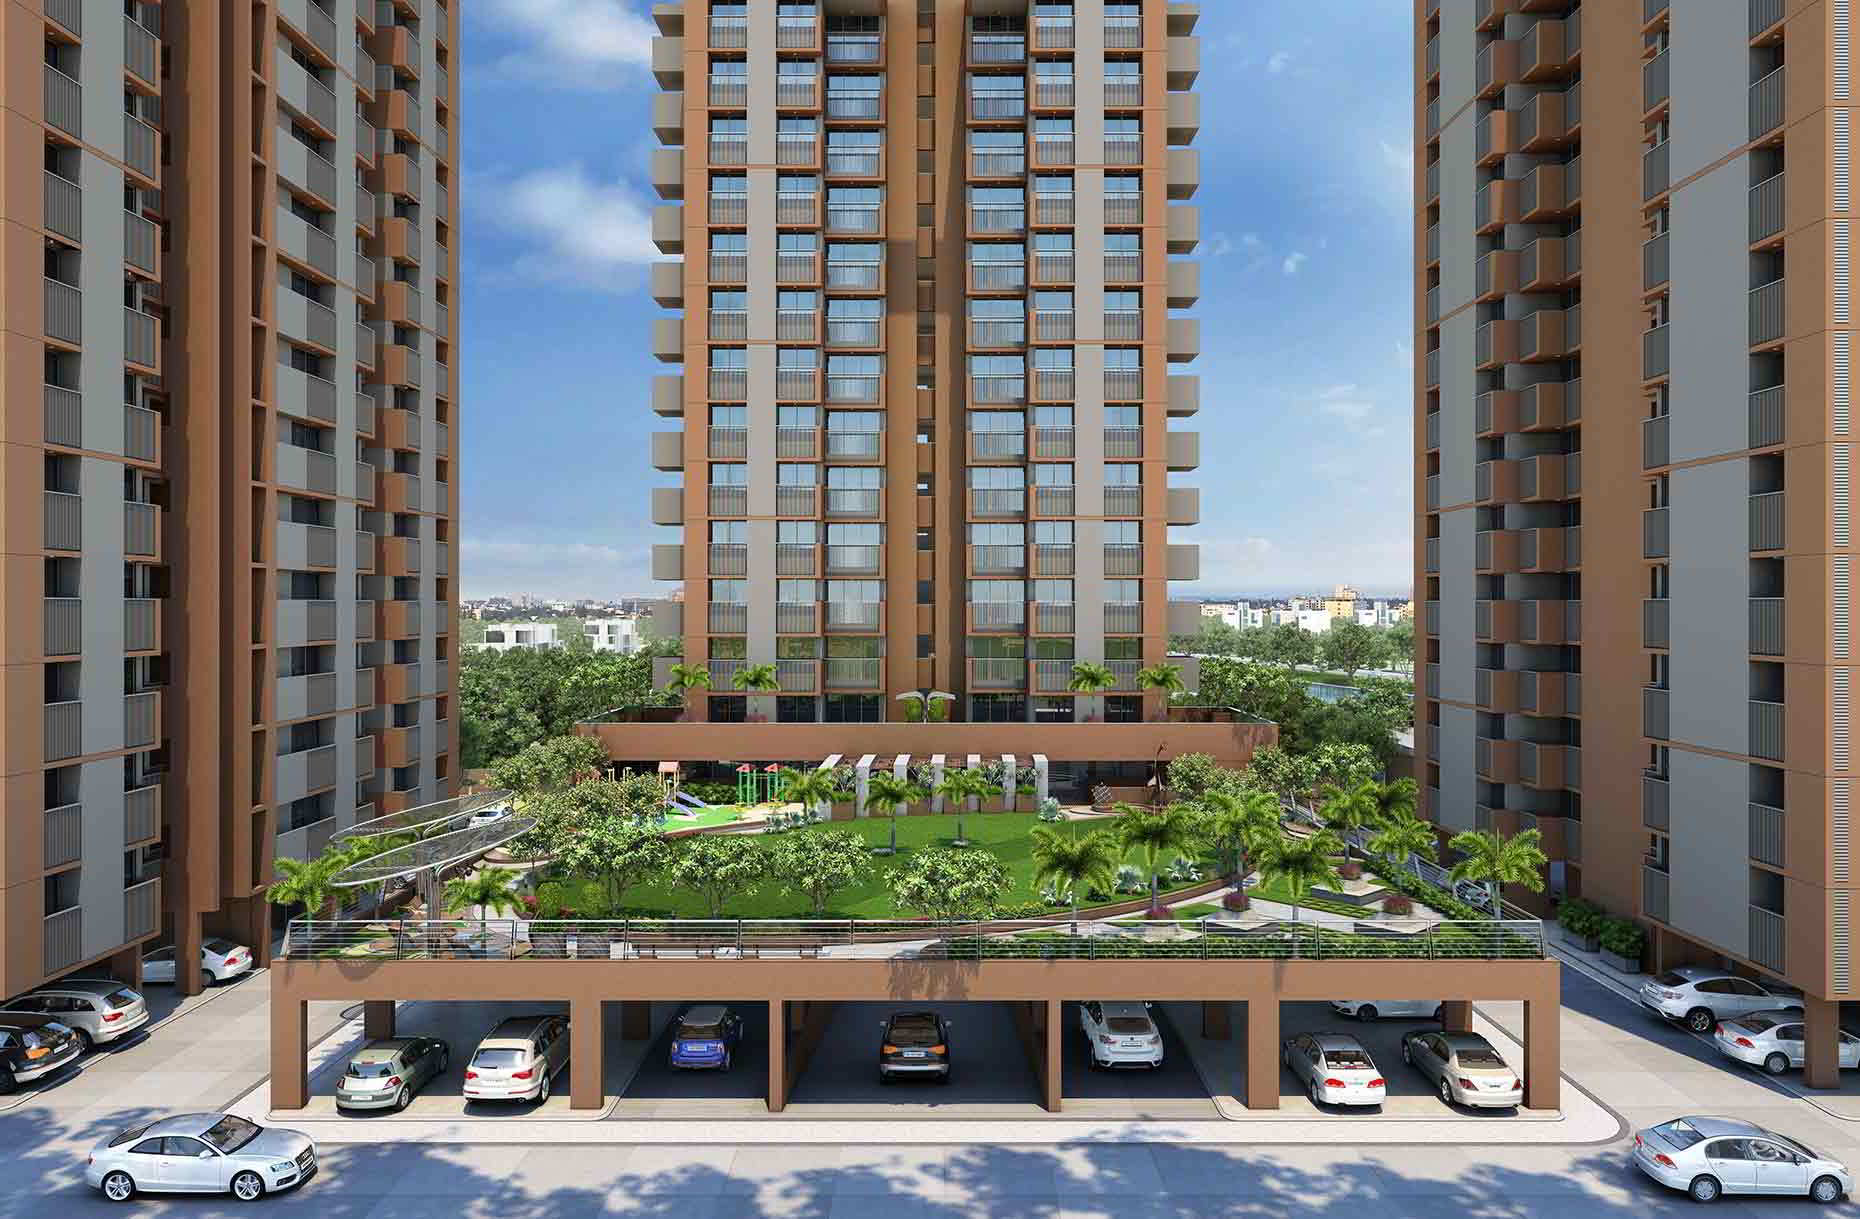 2BHK & 3BHK Flats For Sale In Silver Brook, Sp Ring Road, Ahmedabad.